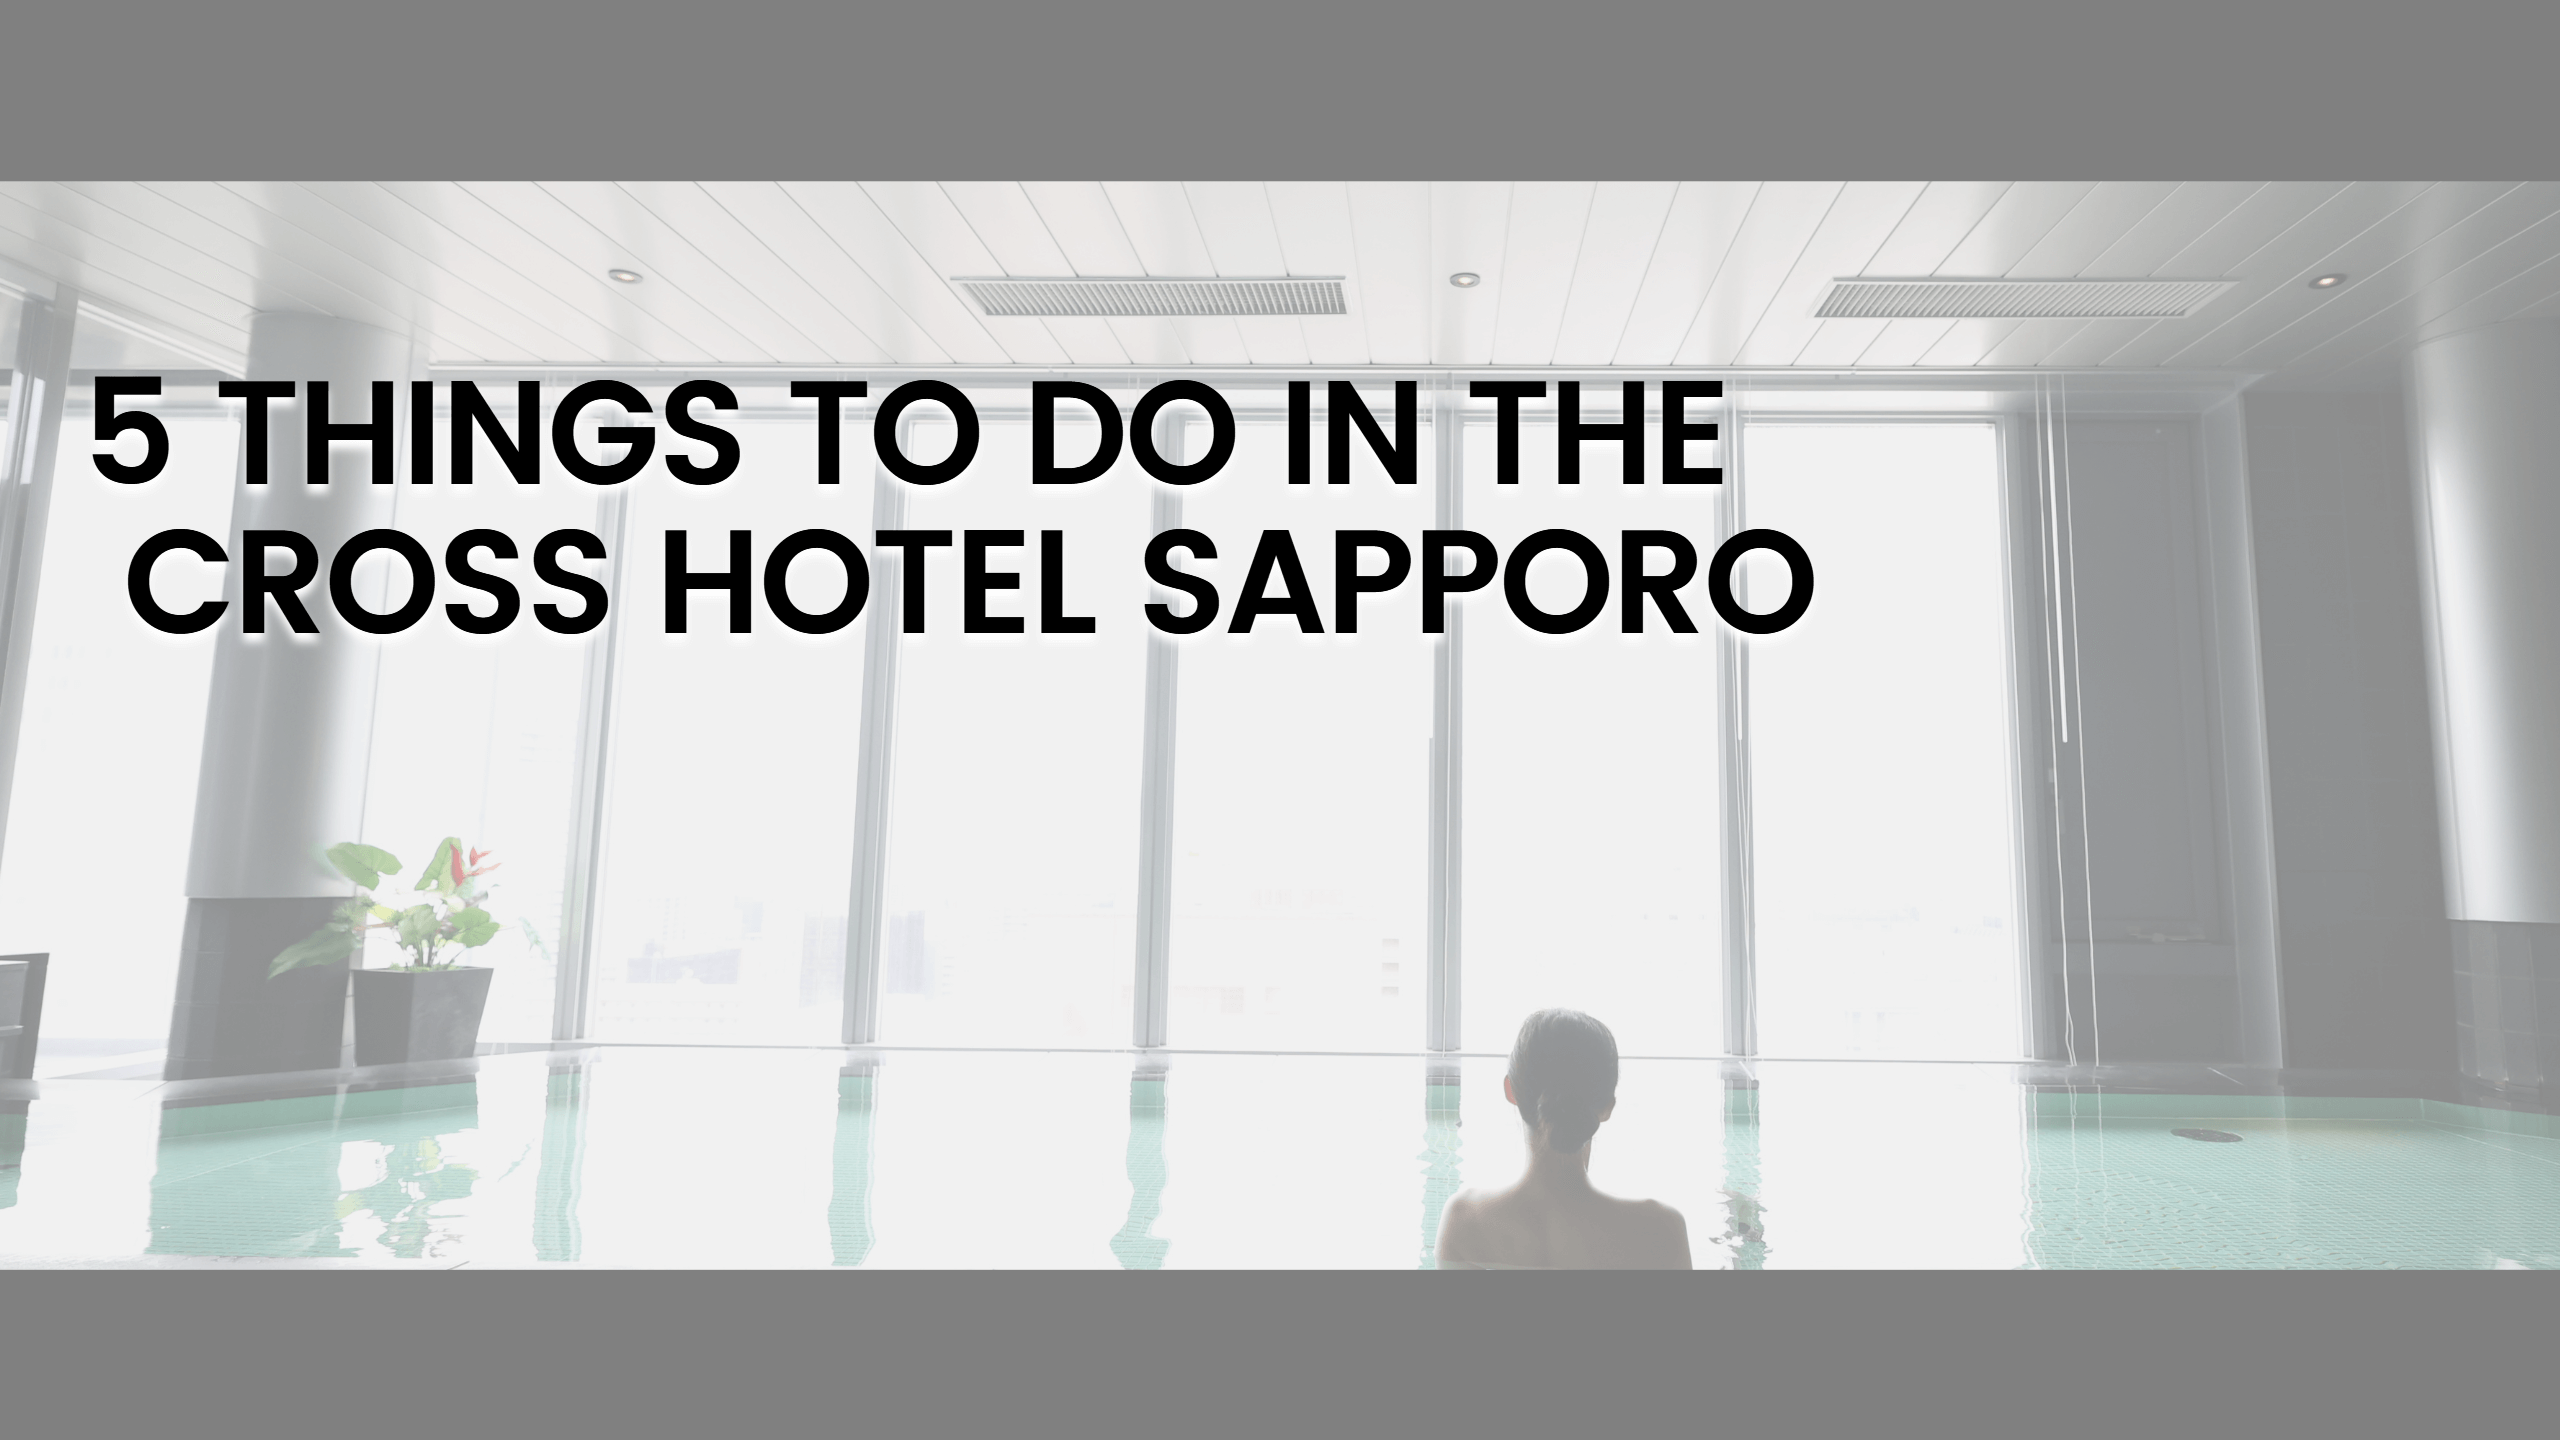 5 Things to do in the Cross Hotel Sapporo